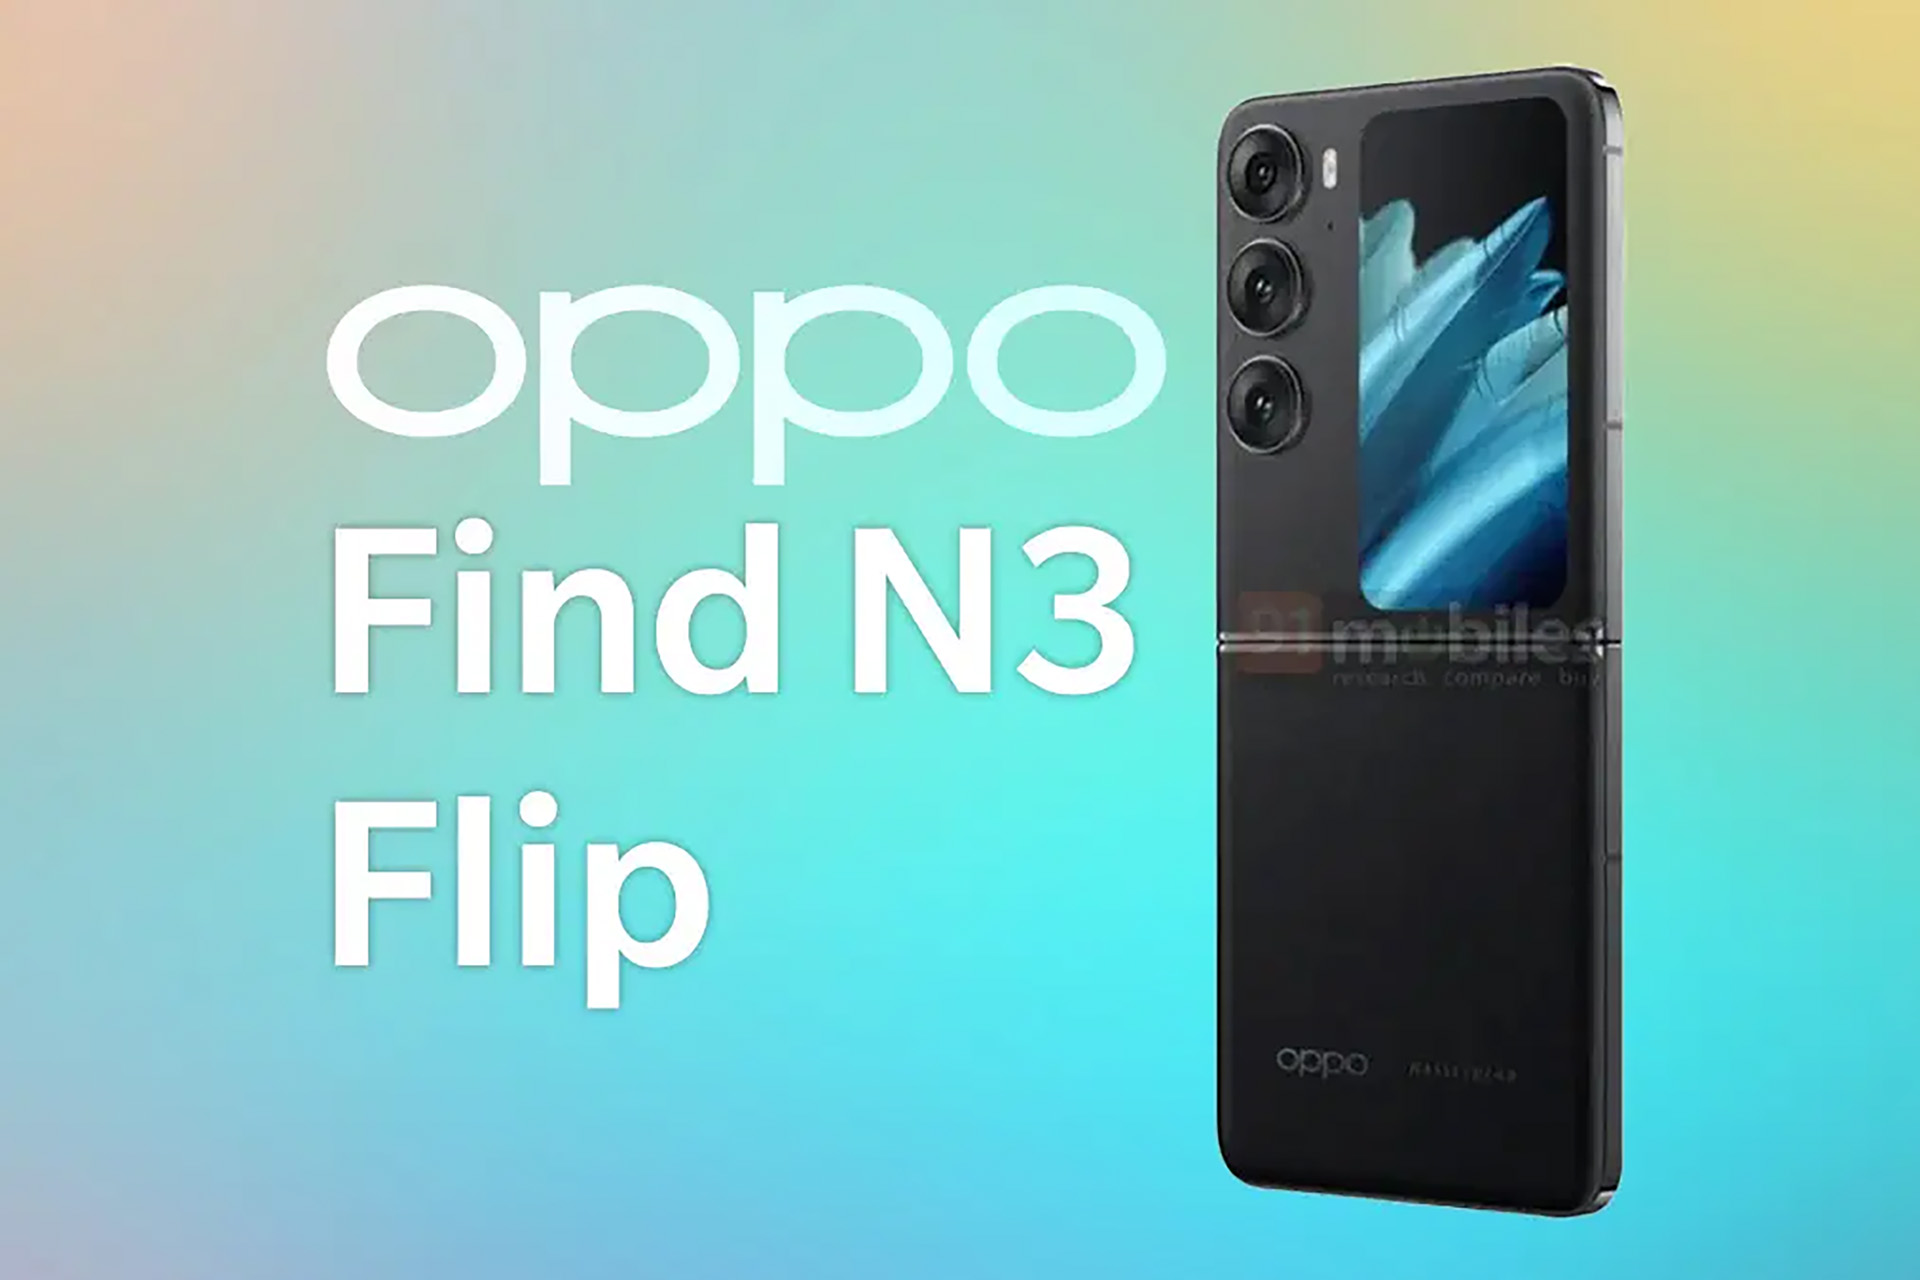 OPPO Find N3 Flip Renders Leaked with some specs